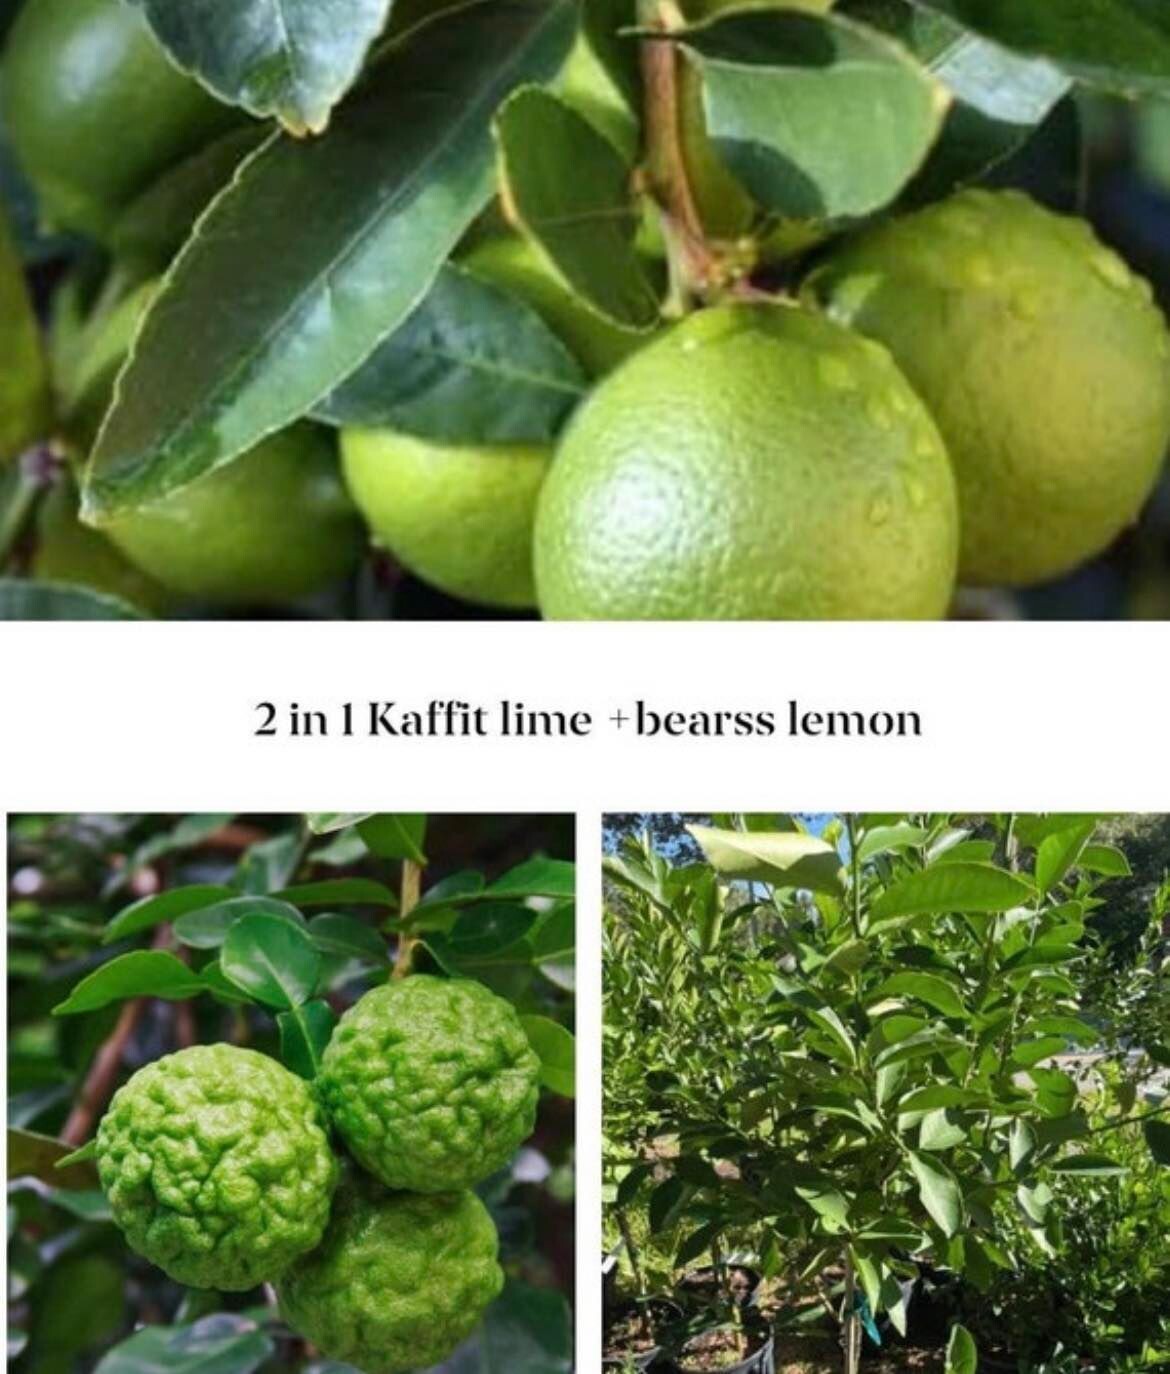 2 in 1 citrus grafted tree get fruit very Soon 10 Gallon 